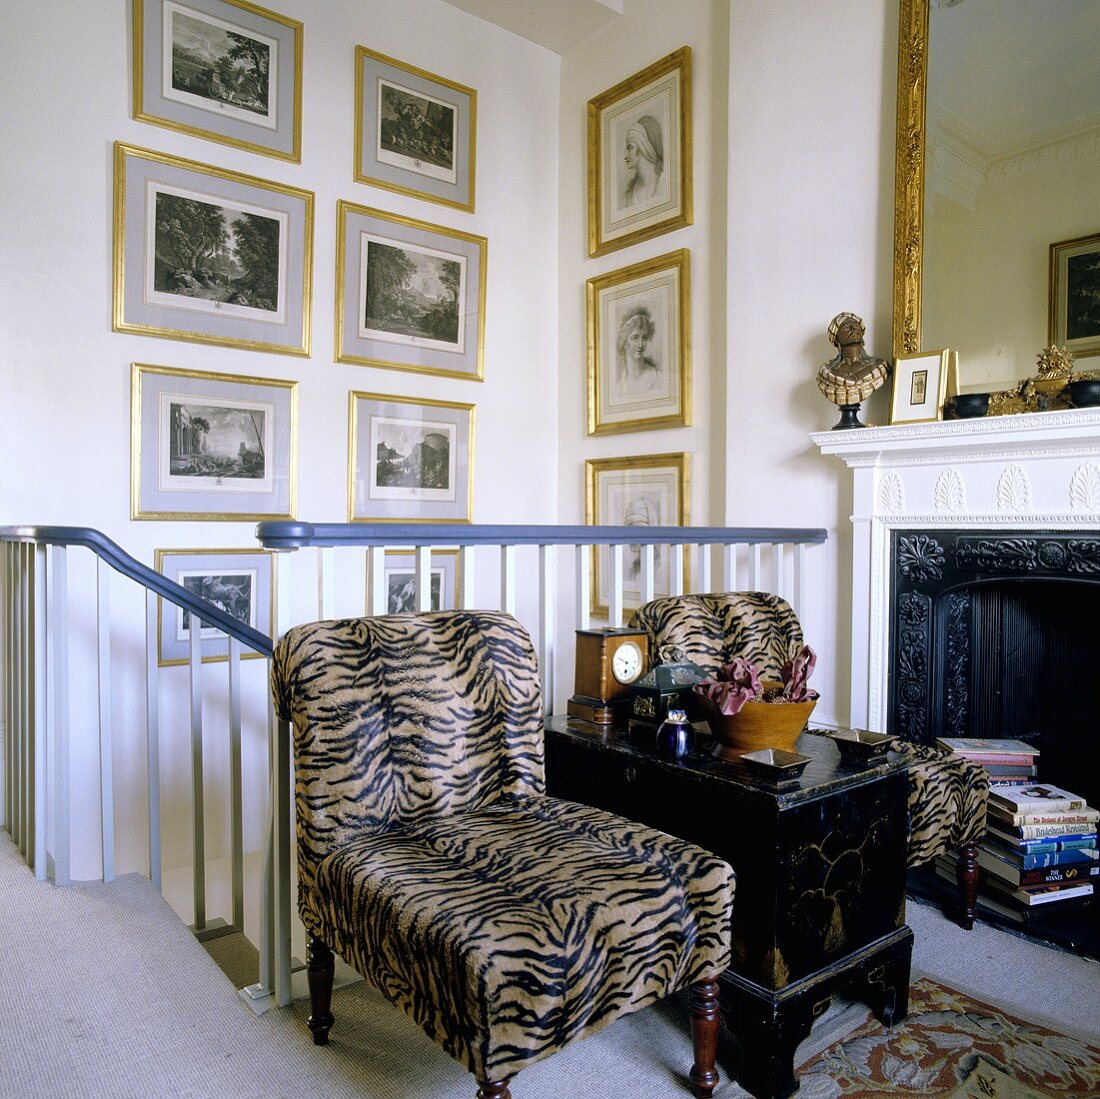 Armchairs with fur covers against a banister rail in front of a fireplace and pictures in gold frames hanging on the wall of the stairwell